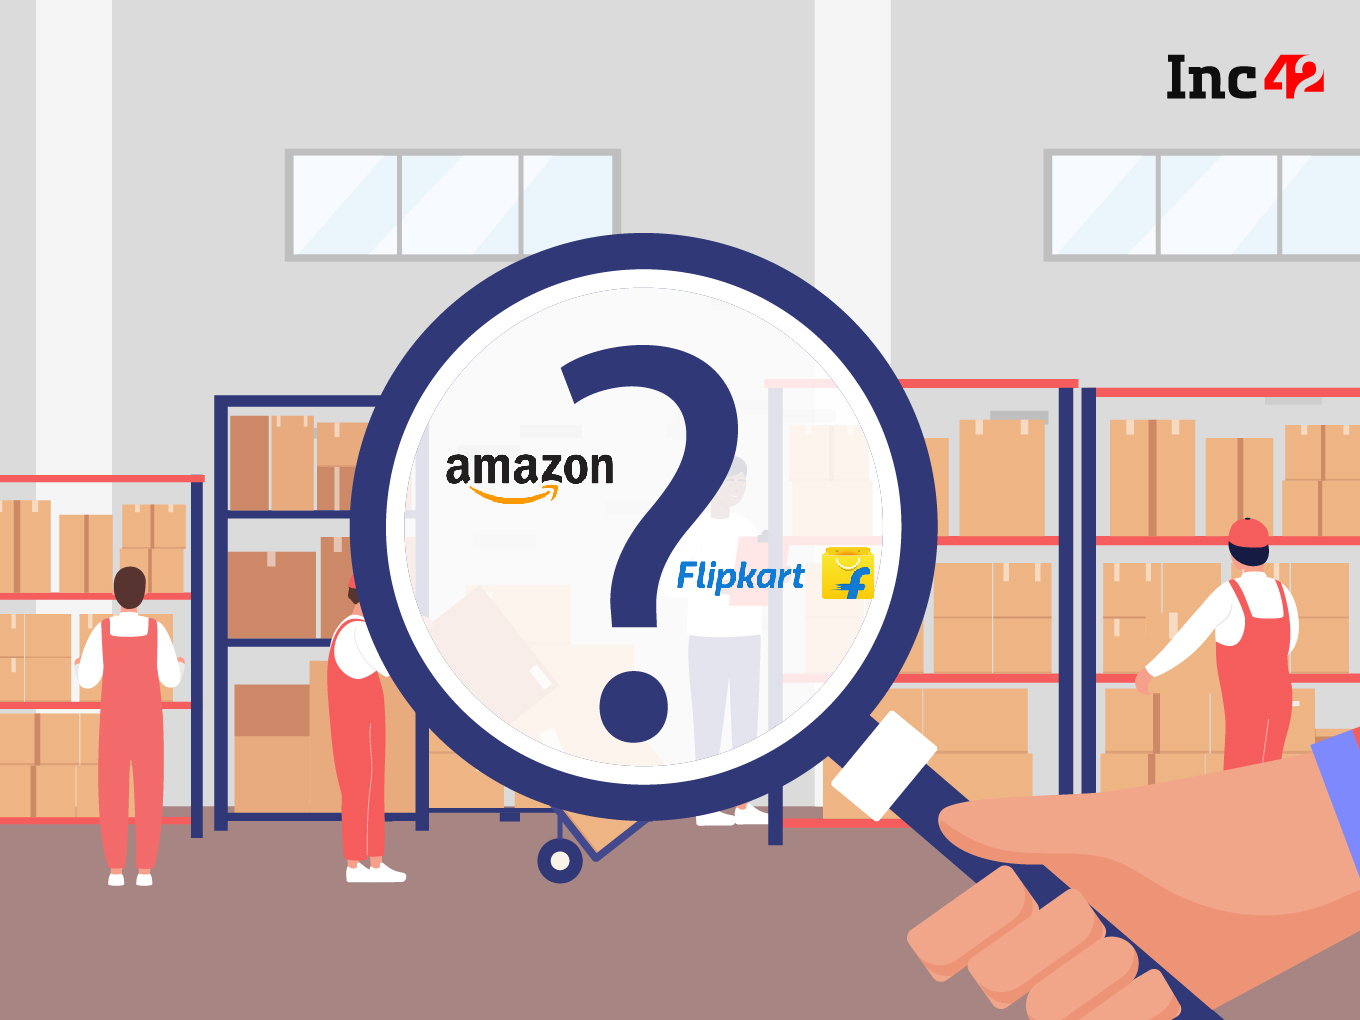 CCI Collects Data, Documents From Amazon, Flipkart Sellers On The Second Day Of Raids